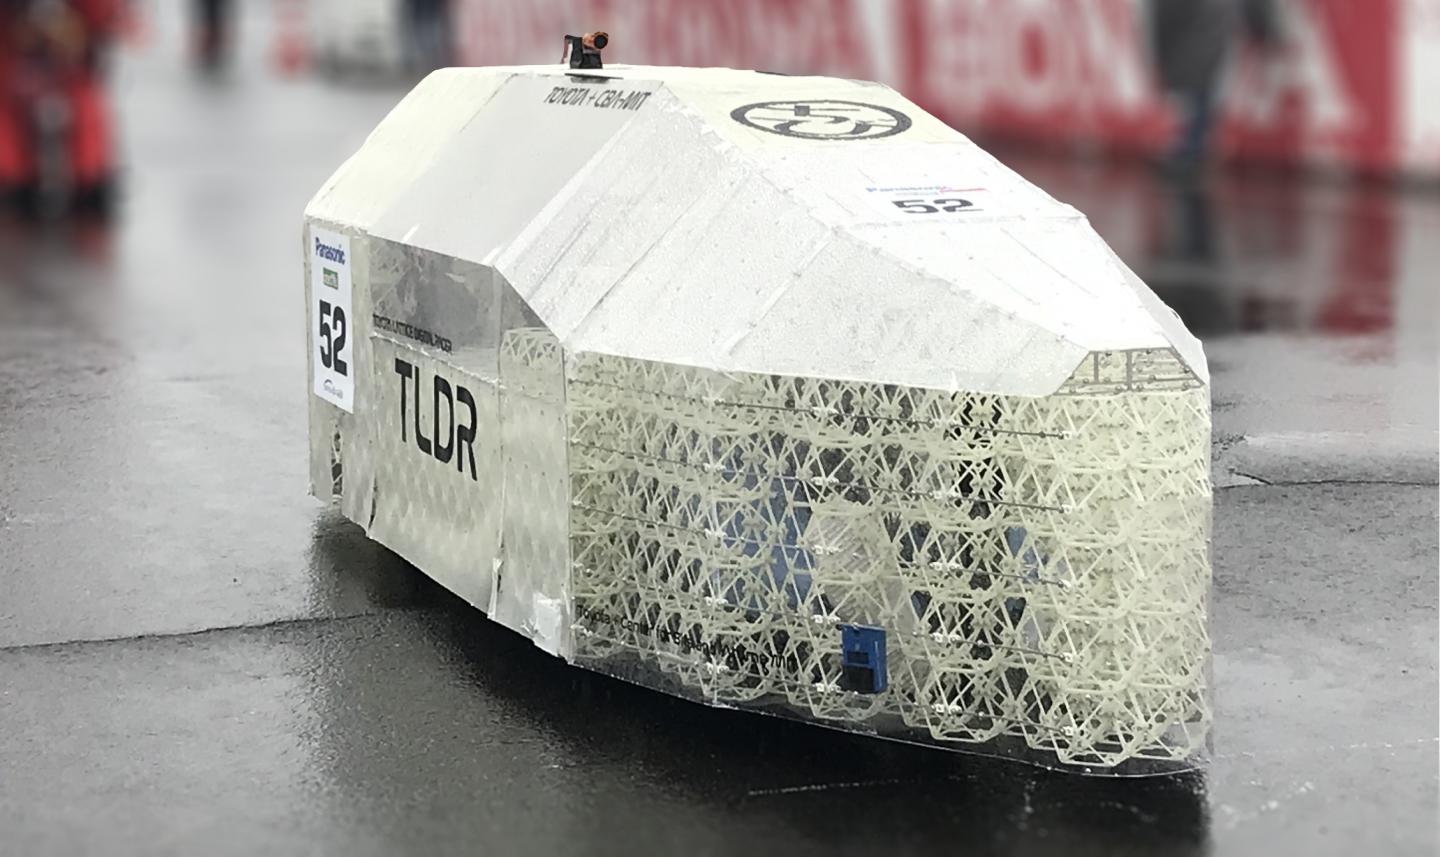 Army and MIT's way of linking metamaterials makes building a supermileage vehicles, like this one from collaborators Toyota Automotive Society, possible. Supermileage vehicles aim to get the most mileage out of a single tank of high-octane gasoline.

CREDIT
(Kohshi Katoh, Toyota Automotive Society)